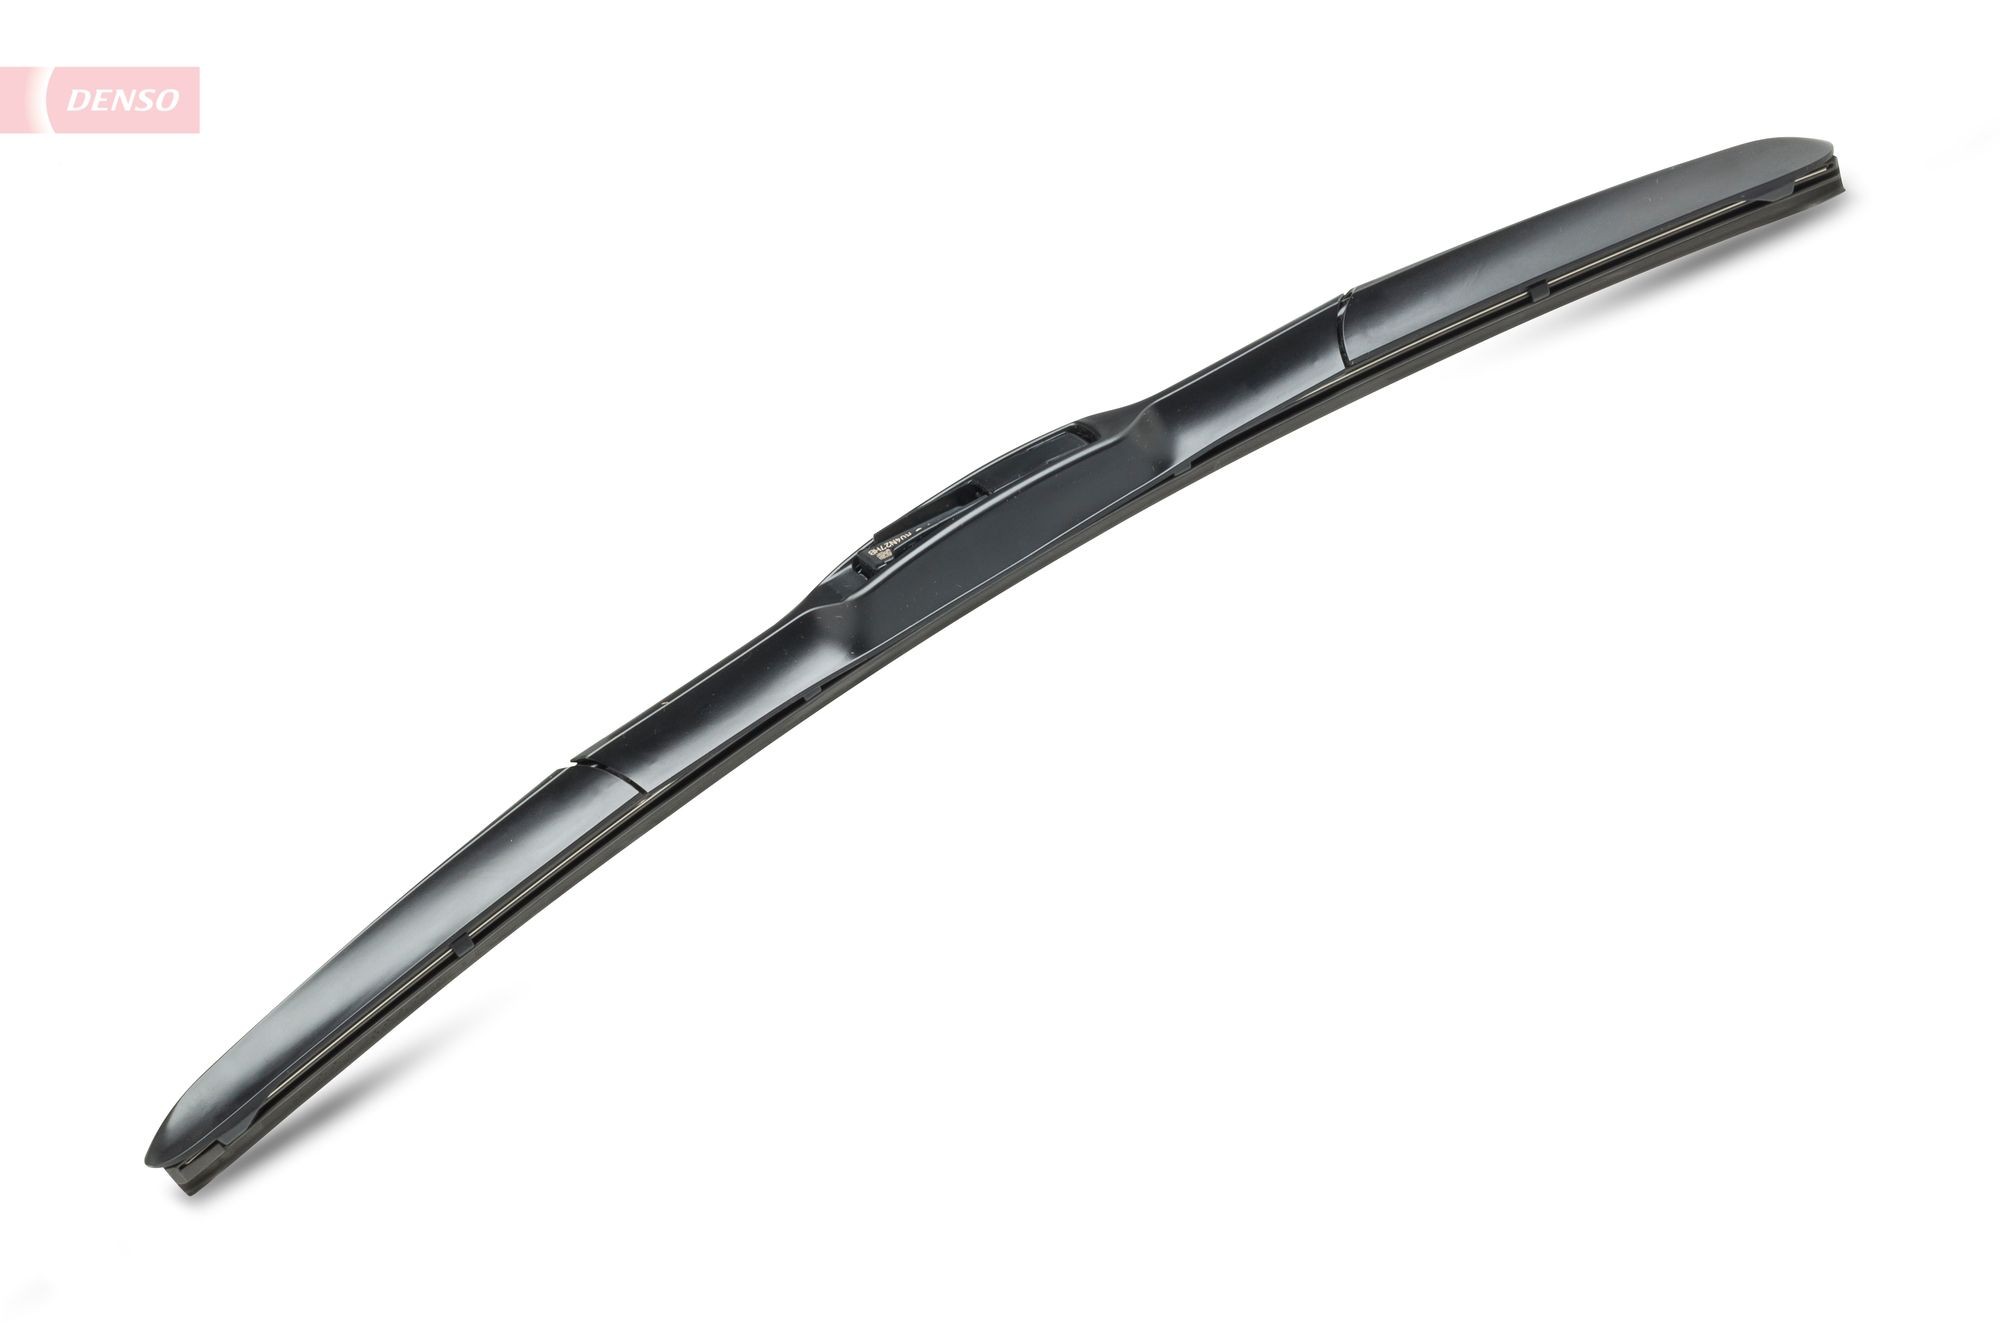 Wiper Blade DENSO DUR-045R - find, compare the prices and save!